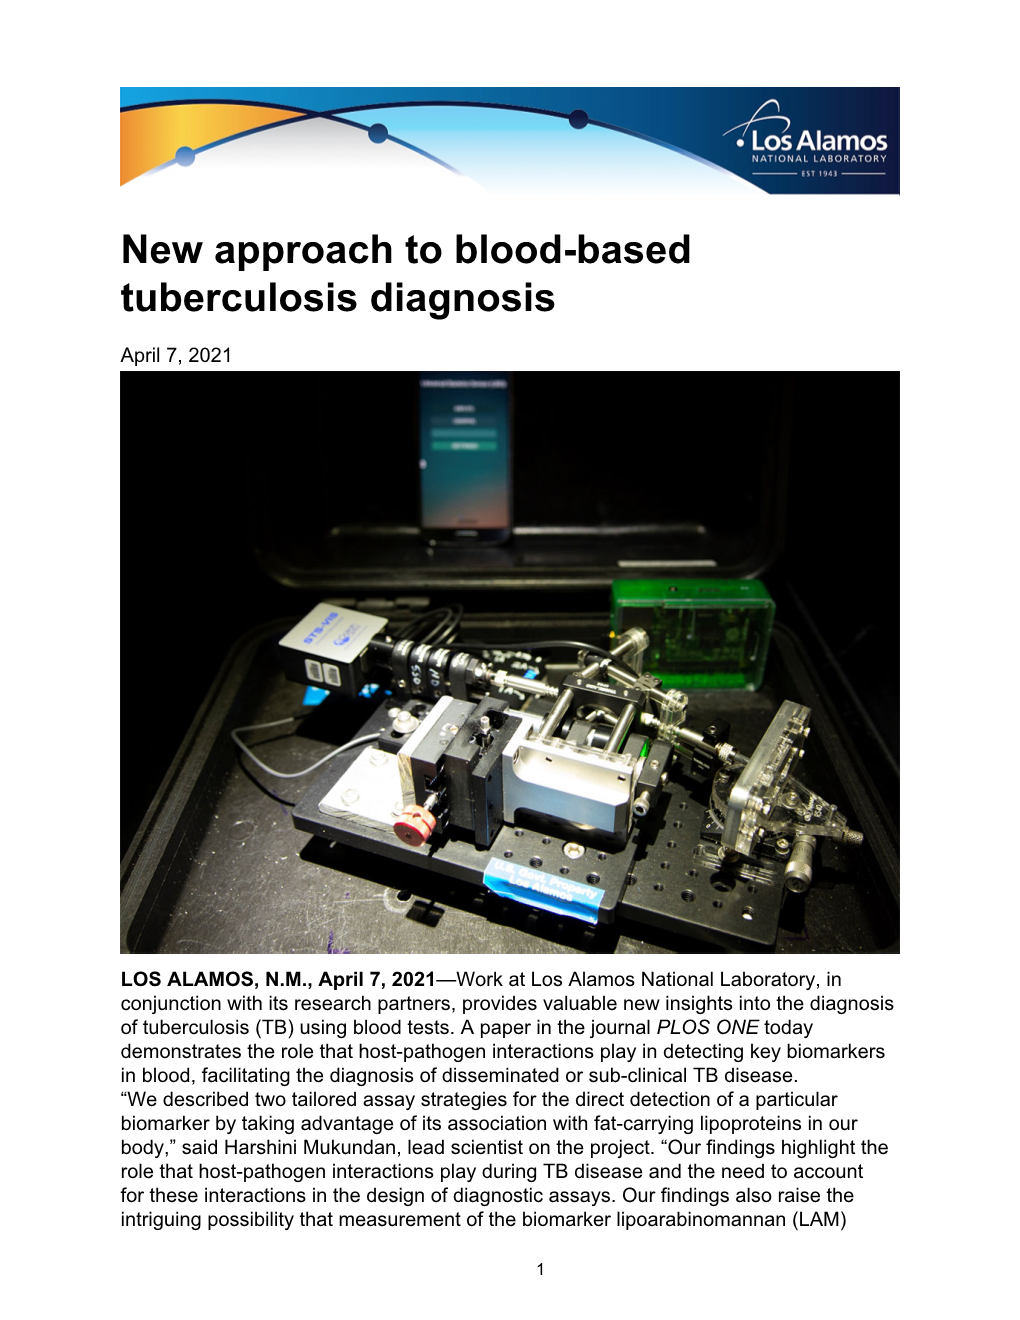 New Approach to Blood-Based Tuberculosis Diagnosis